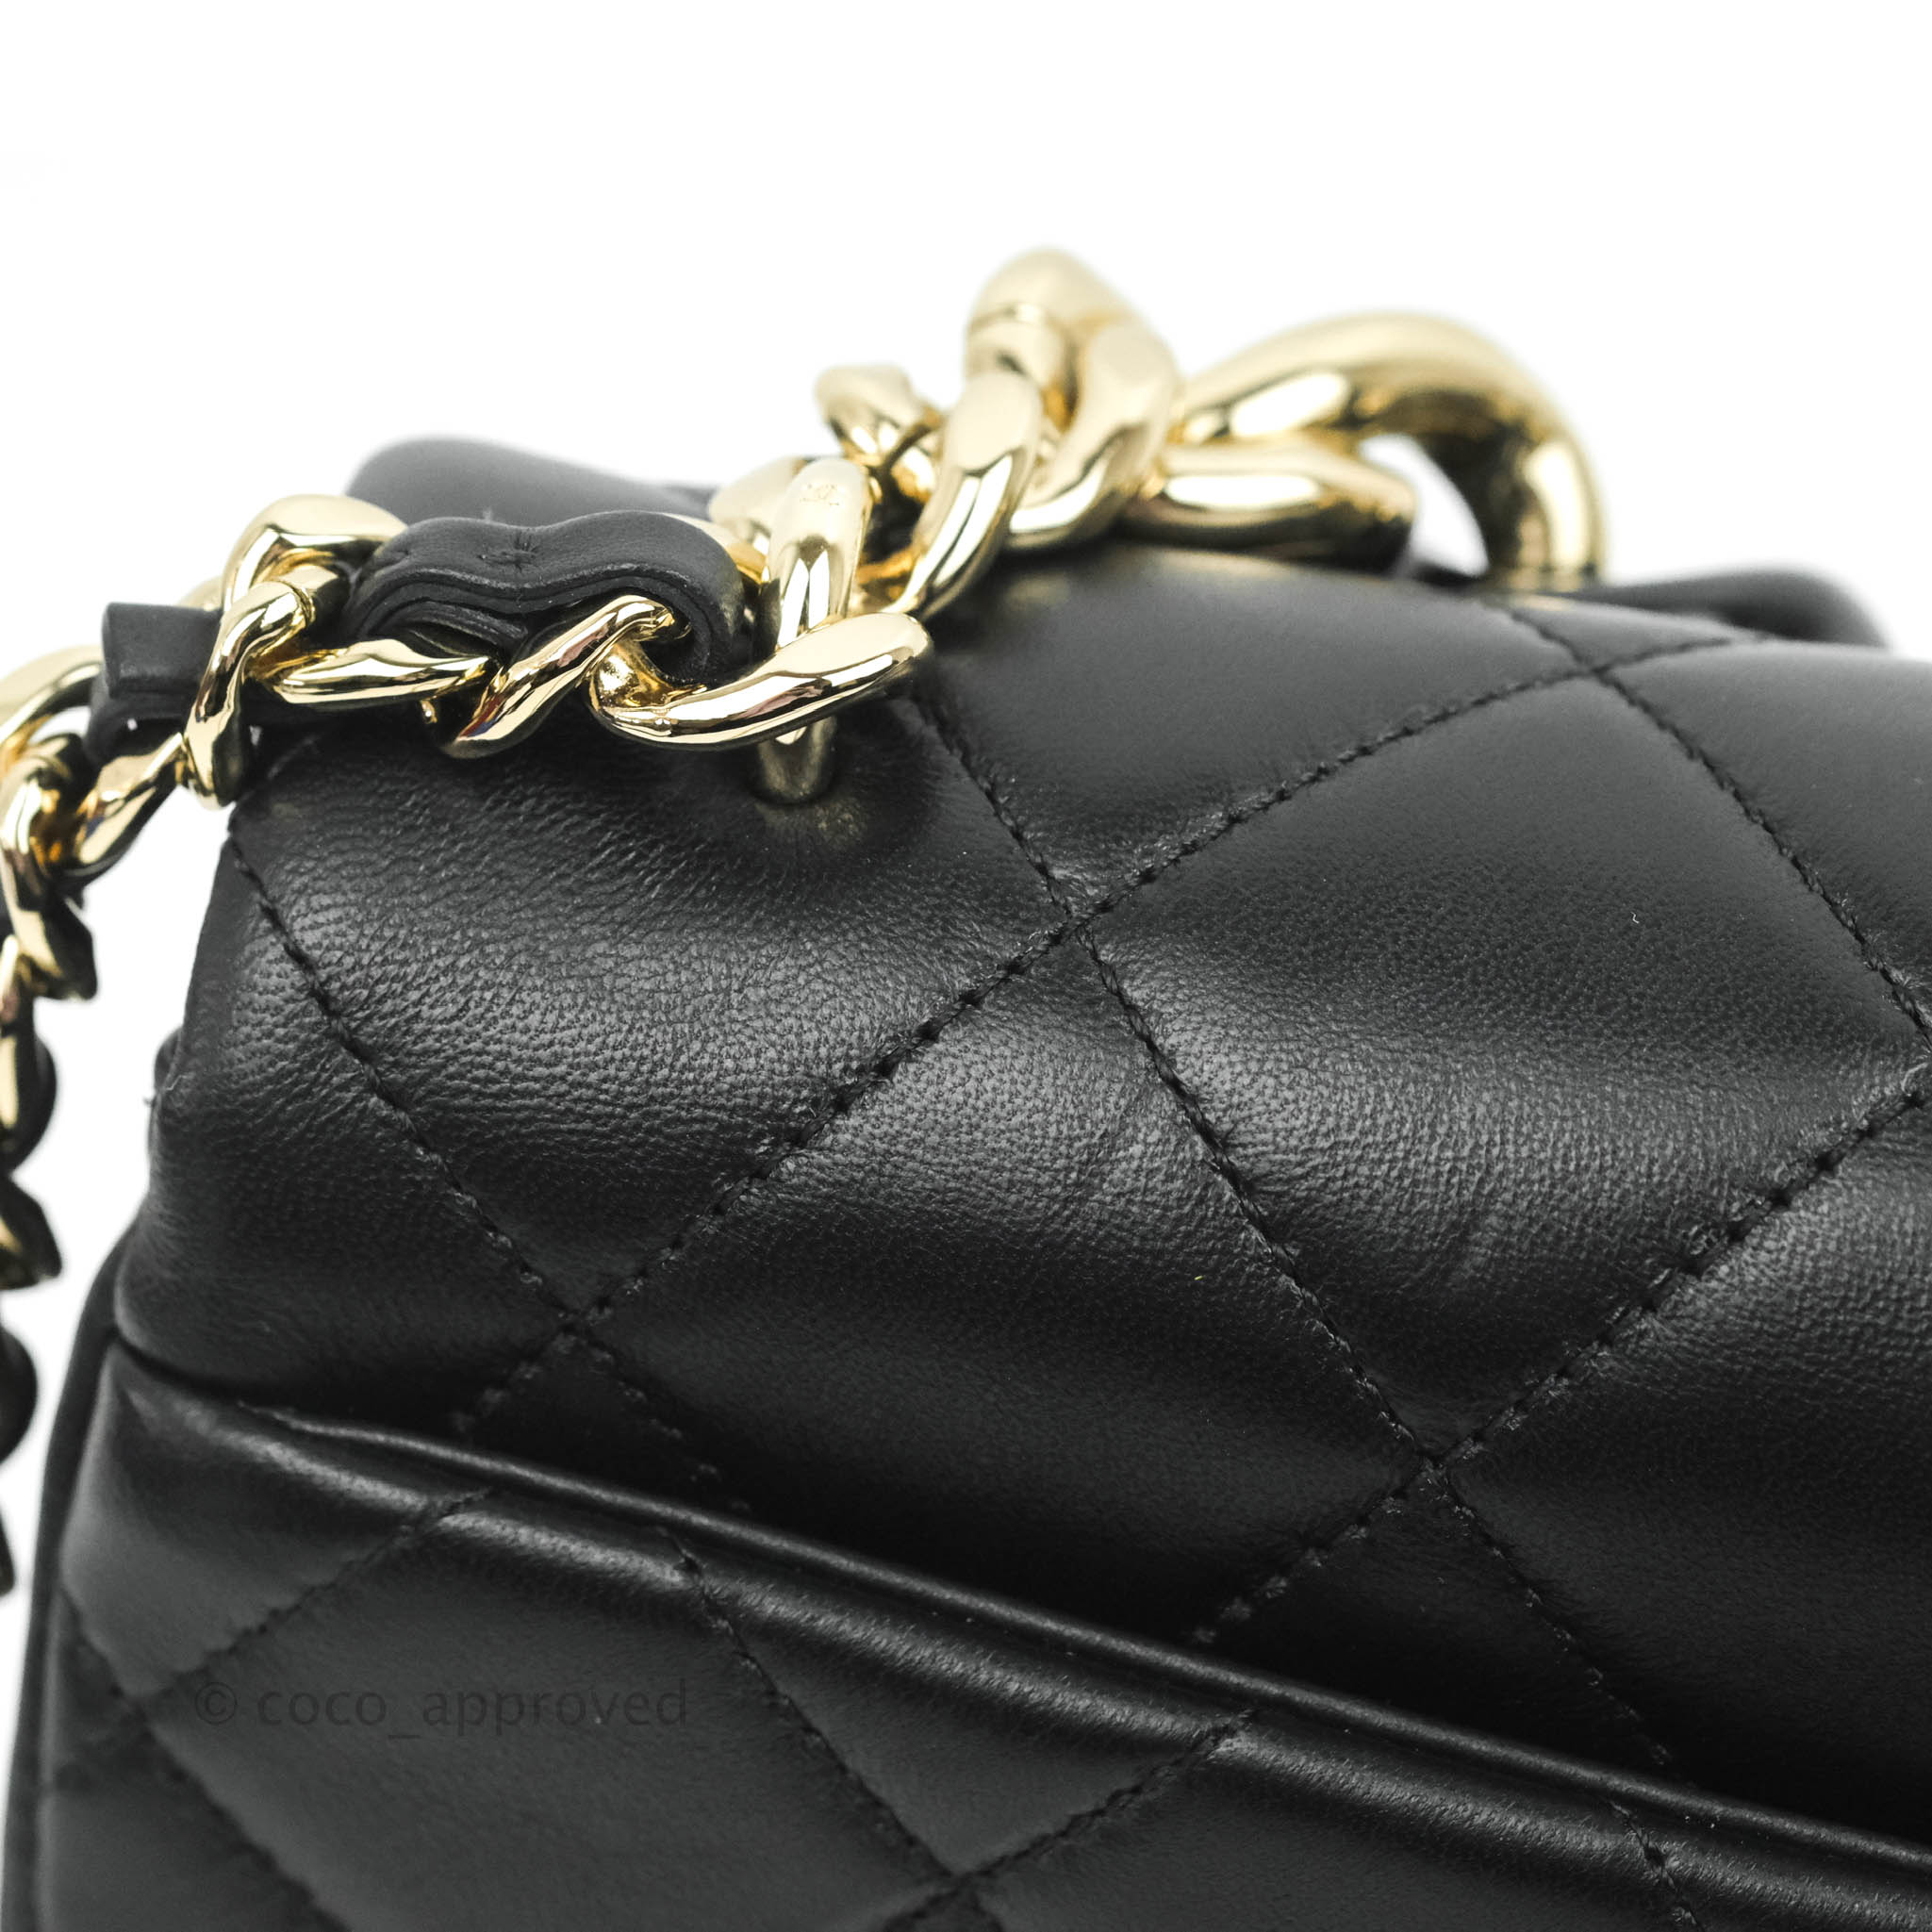 CHANEL Lambskin Quilted Resin Bi-Color Chain Flap Bag Light